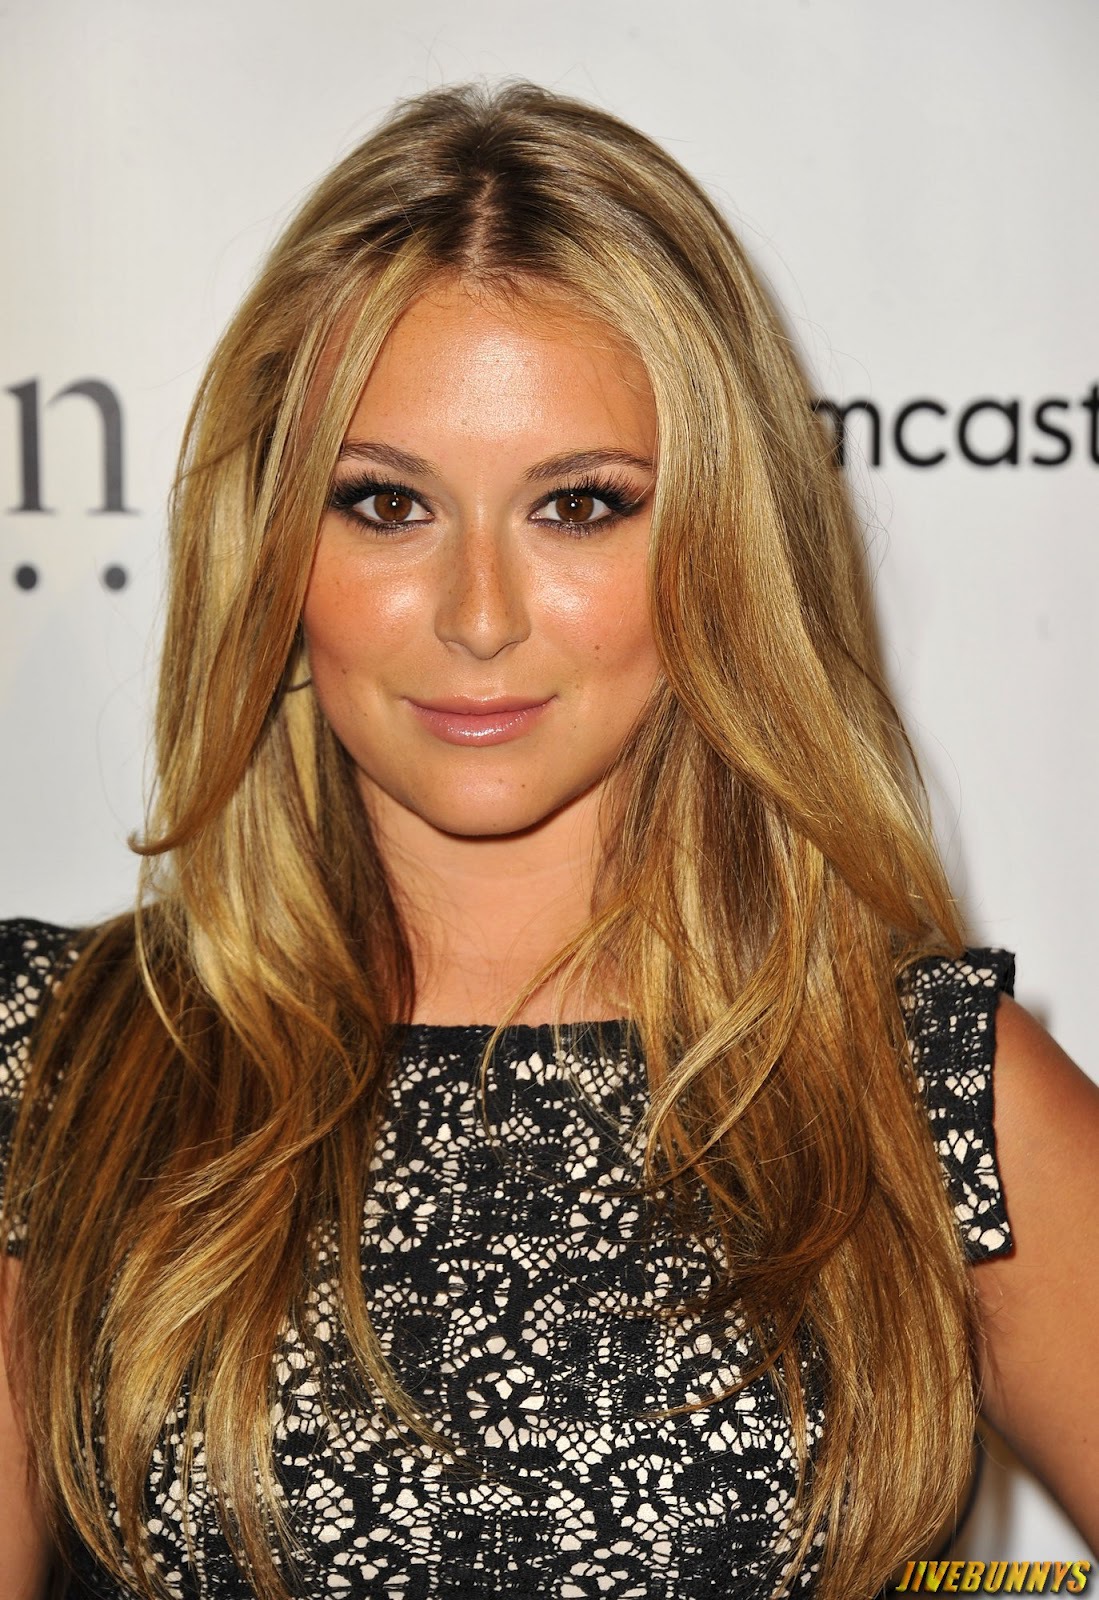 Alexa Vega Wallpapers Images Photos Pictures Backgrounds